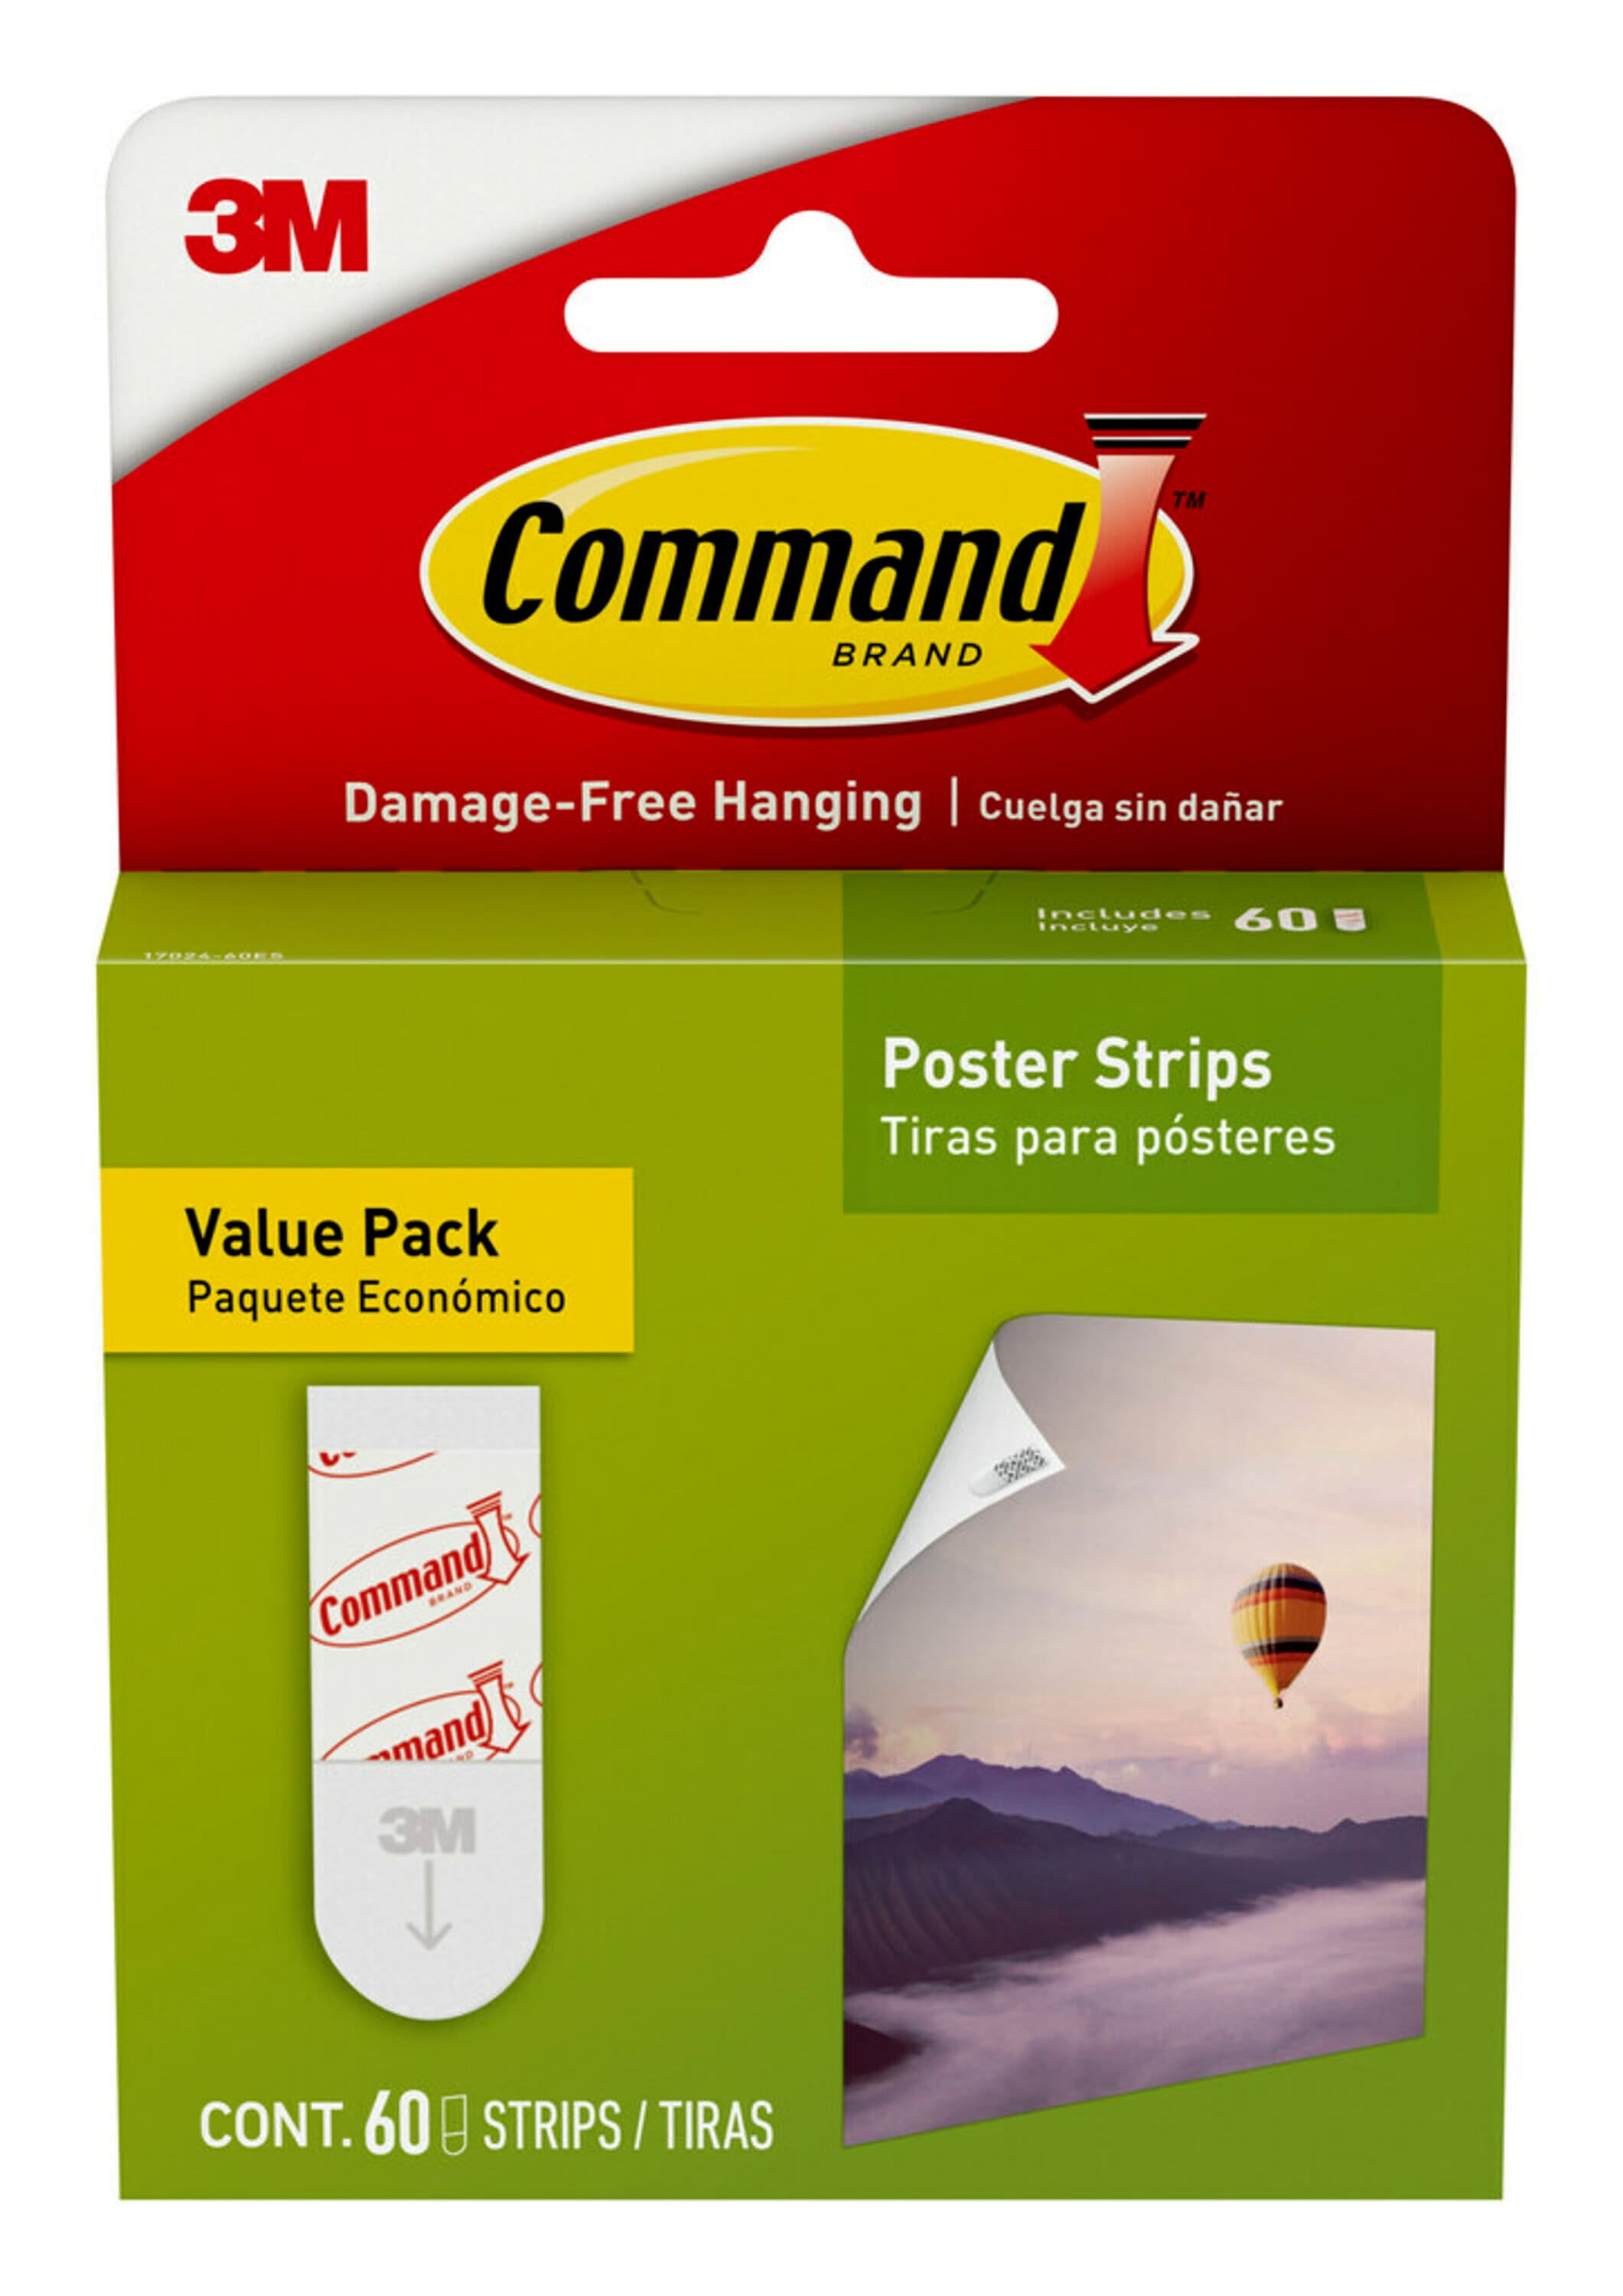 Save on Command Damage-Free Hanging Picture Hanging Strips Small/Medium  Order Online Delivery